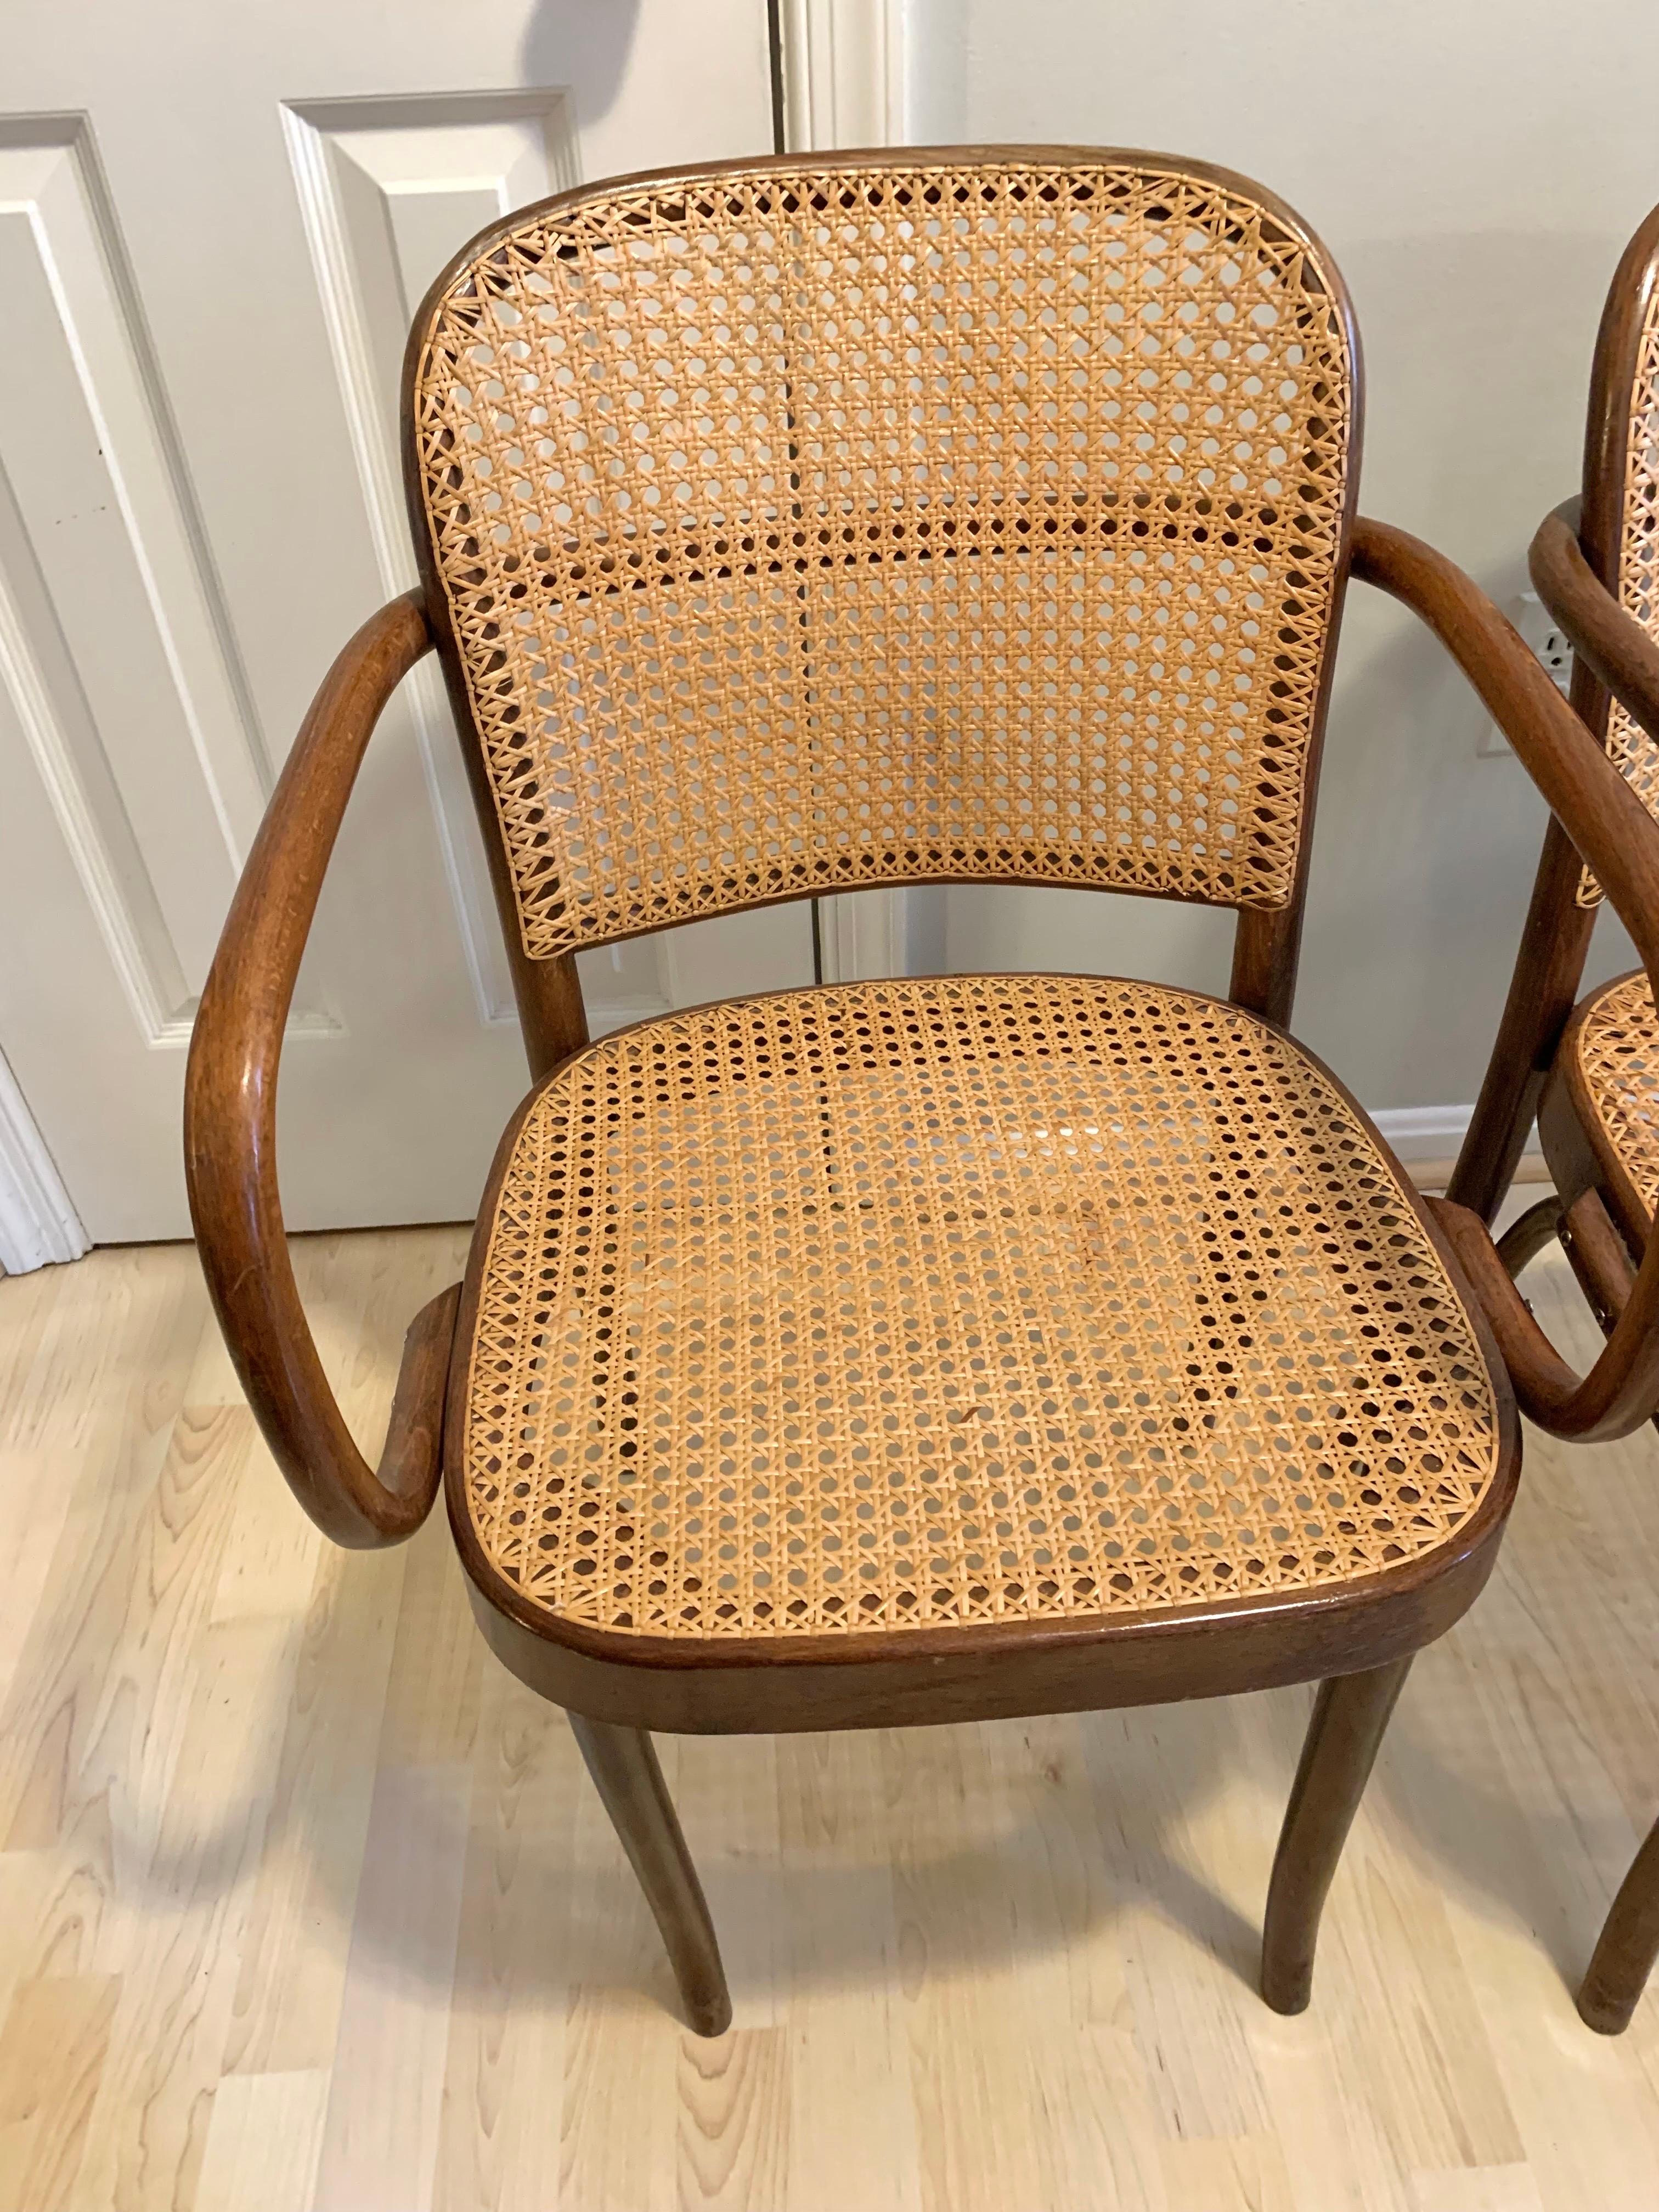 Mid century Josef Frank and Josef Hoffman style bentwood Prague armchairs with caned seats and back. Walnut colored wood frames and handwoven caning.